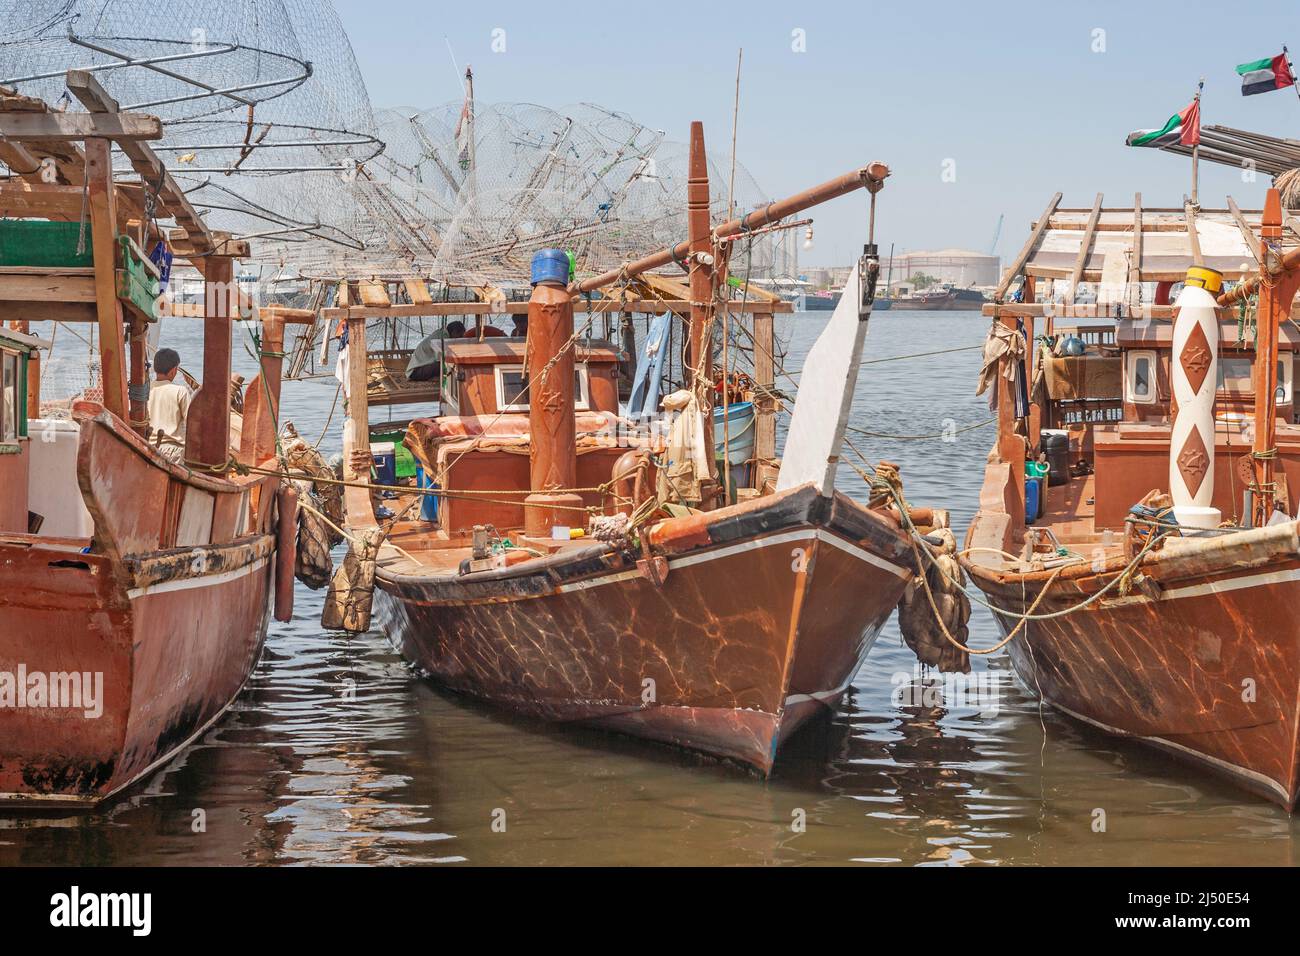 Traditional fishing dhows laden with gargours, or fish traps, near Sharjah Bridge in Sharjah in the United Arab Emirates. Stock Photo